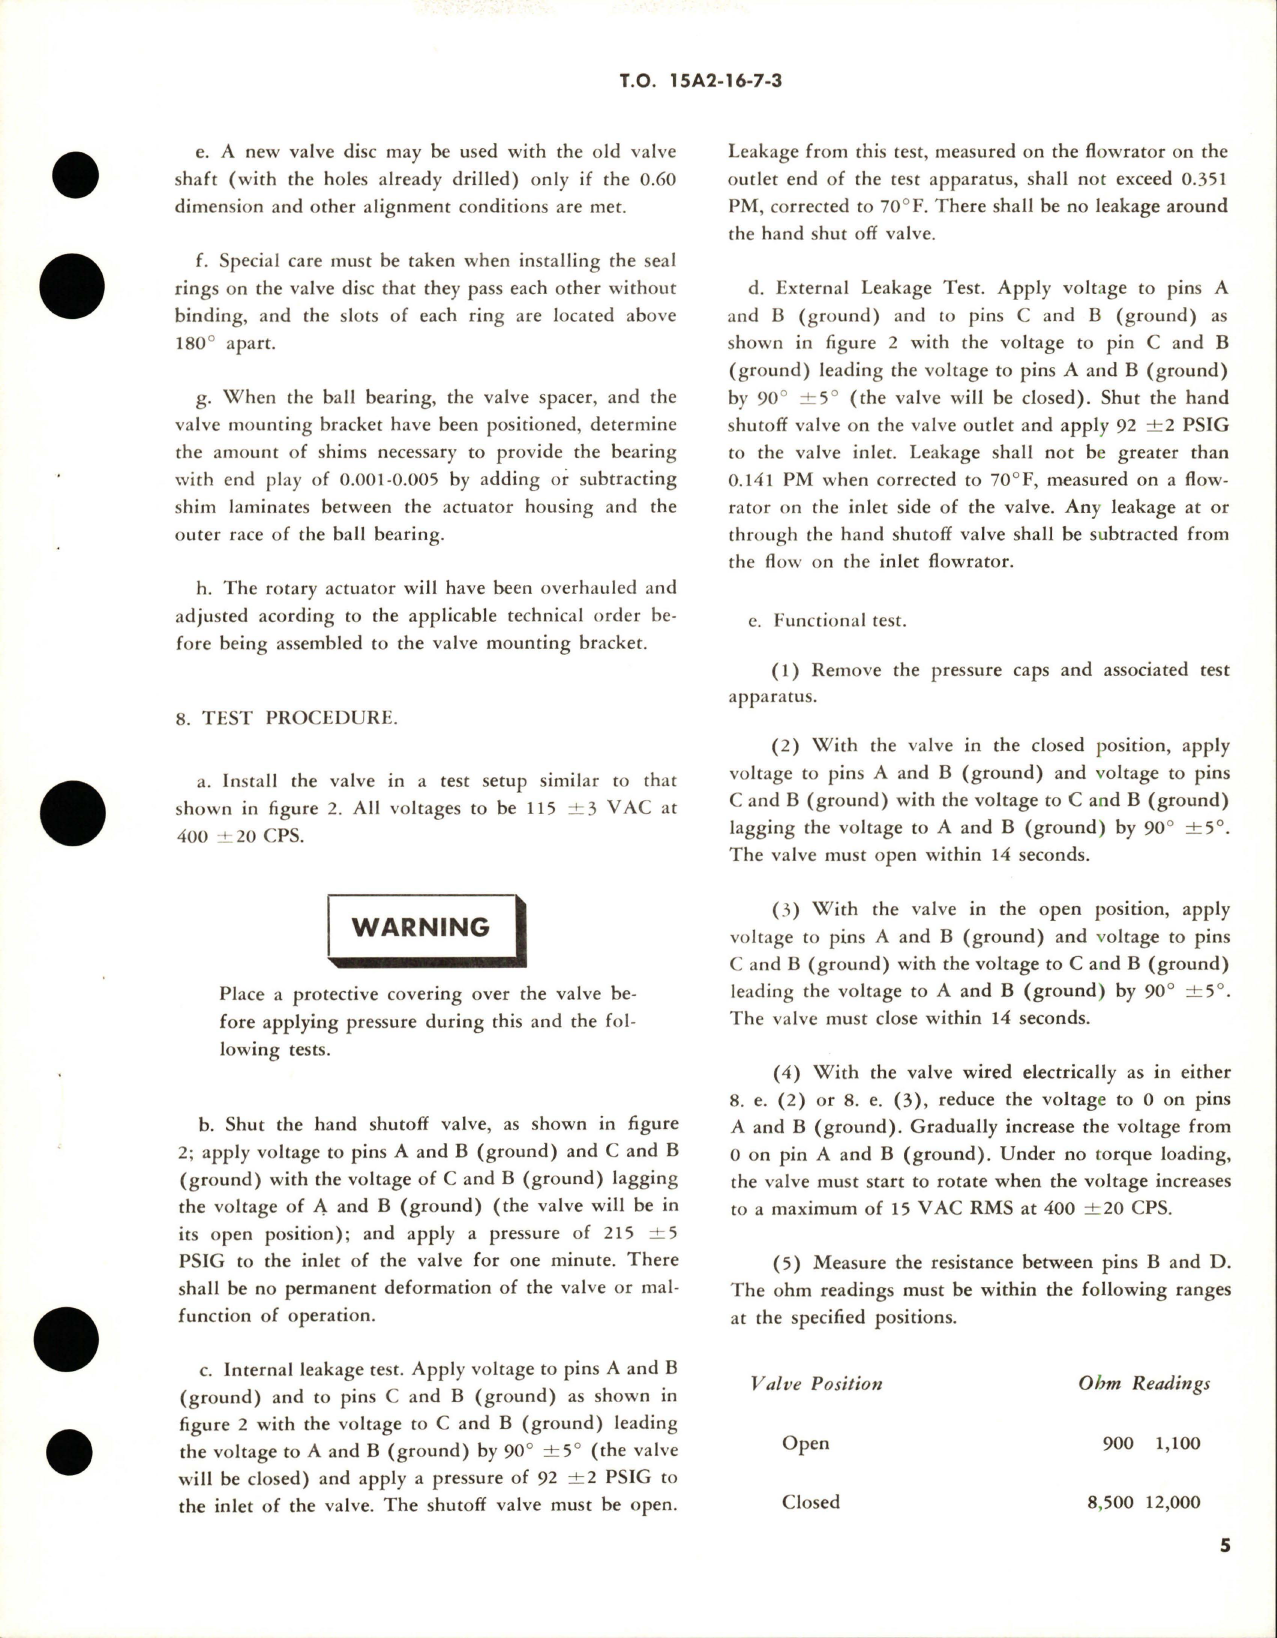 Sample page 5 from AirCorps Library document: Overhaul Instructions and Parts Breakdown for Valve and Actuator - Part 550664